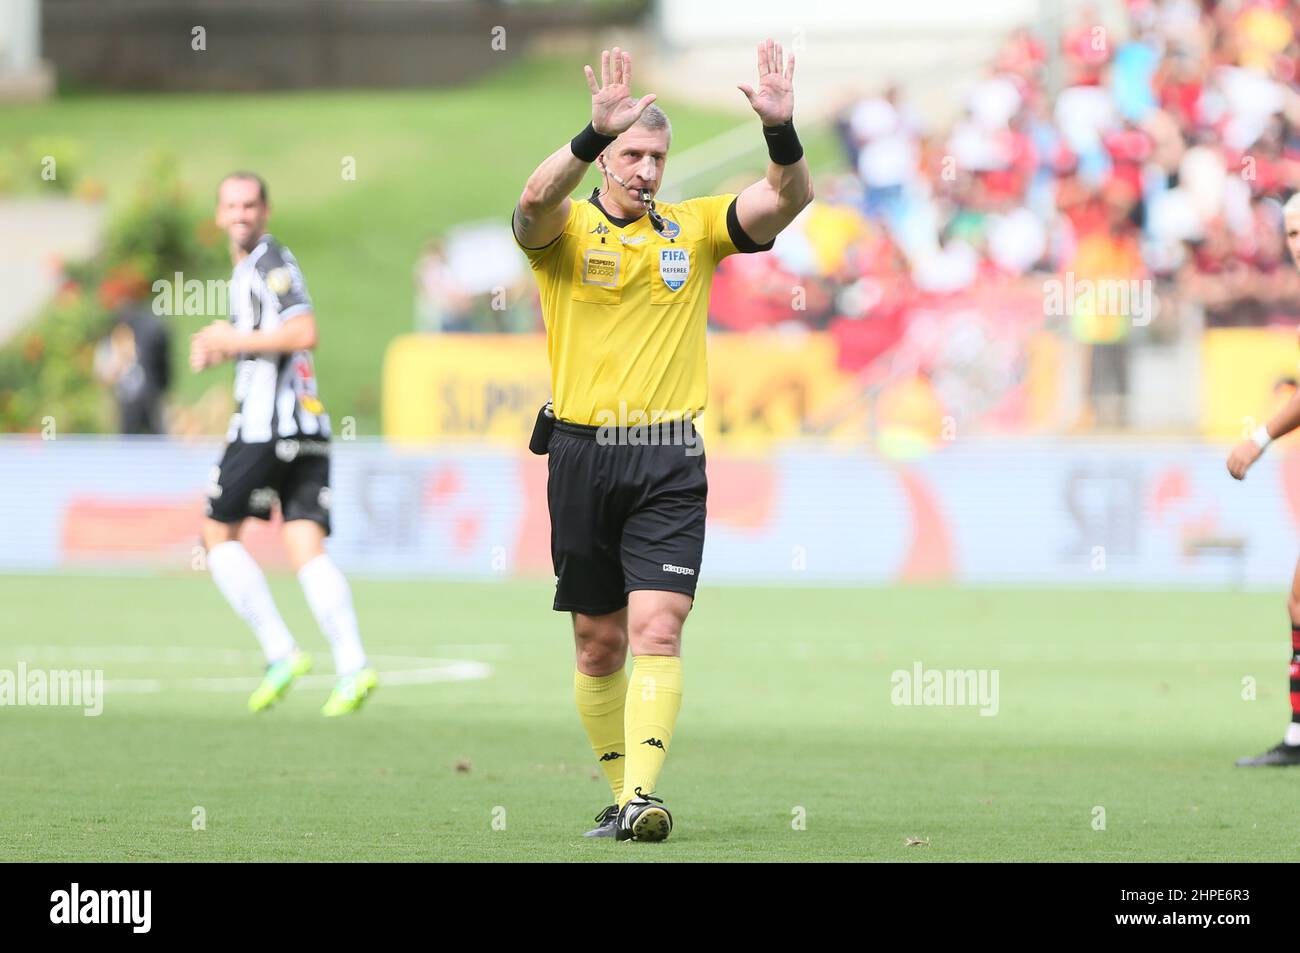 Cuiaba, Brazil. 21st Feb, 2022. MT - Cuiaba - 02/20/2022 - SUPERCOPA DO BRASIL 2022, ATLETICO-MG X FLAMENGO - Referee Daronco during a match between Atletico-MG and Flamengo at the Arena Pantanal stadium for the SuperCopa do Brasil 2022 championship. Photo: Gil Gomes/AGIF/Sipa USA Credit: Sipa USA/Alamy Live News Stock Photo